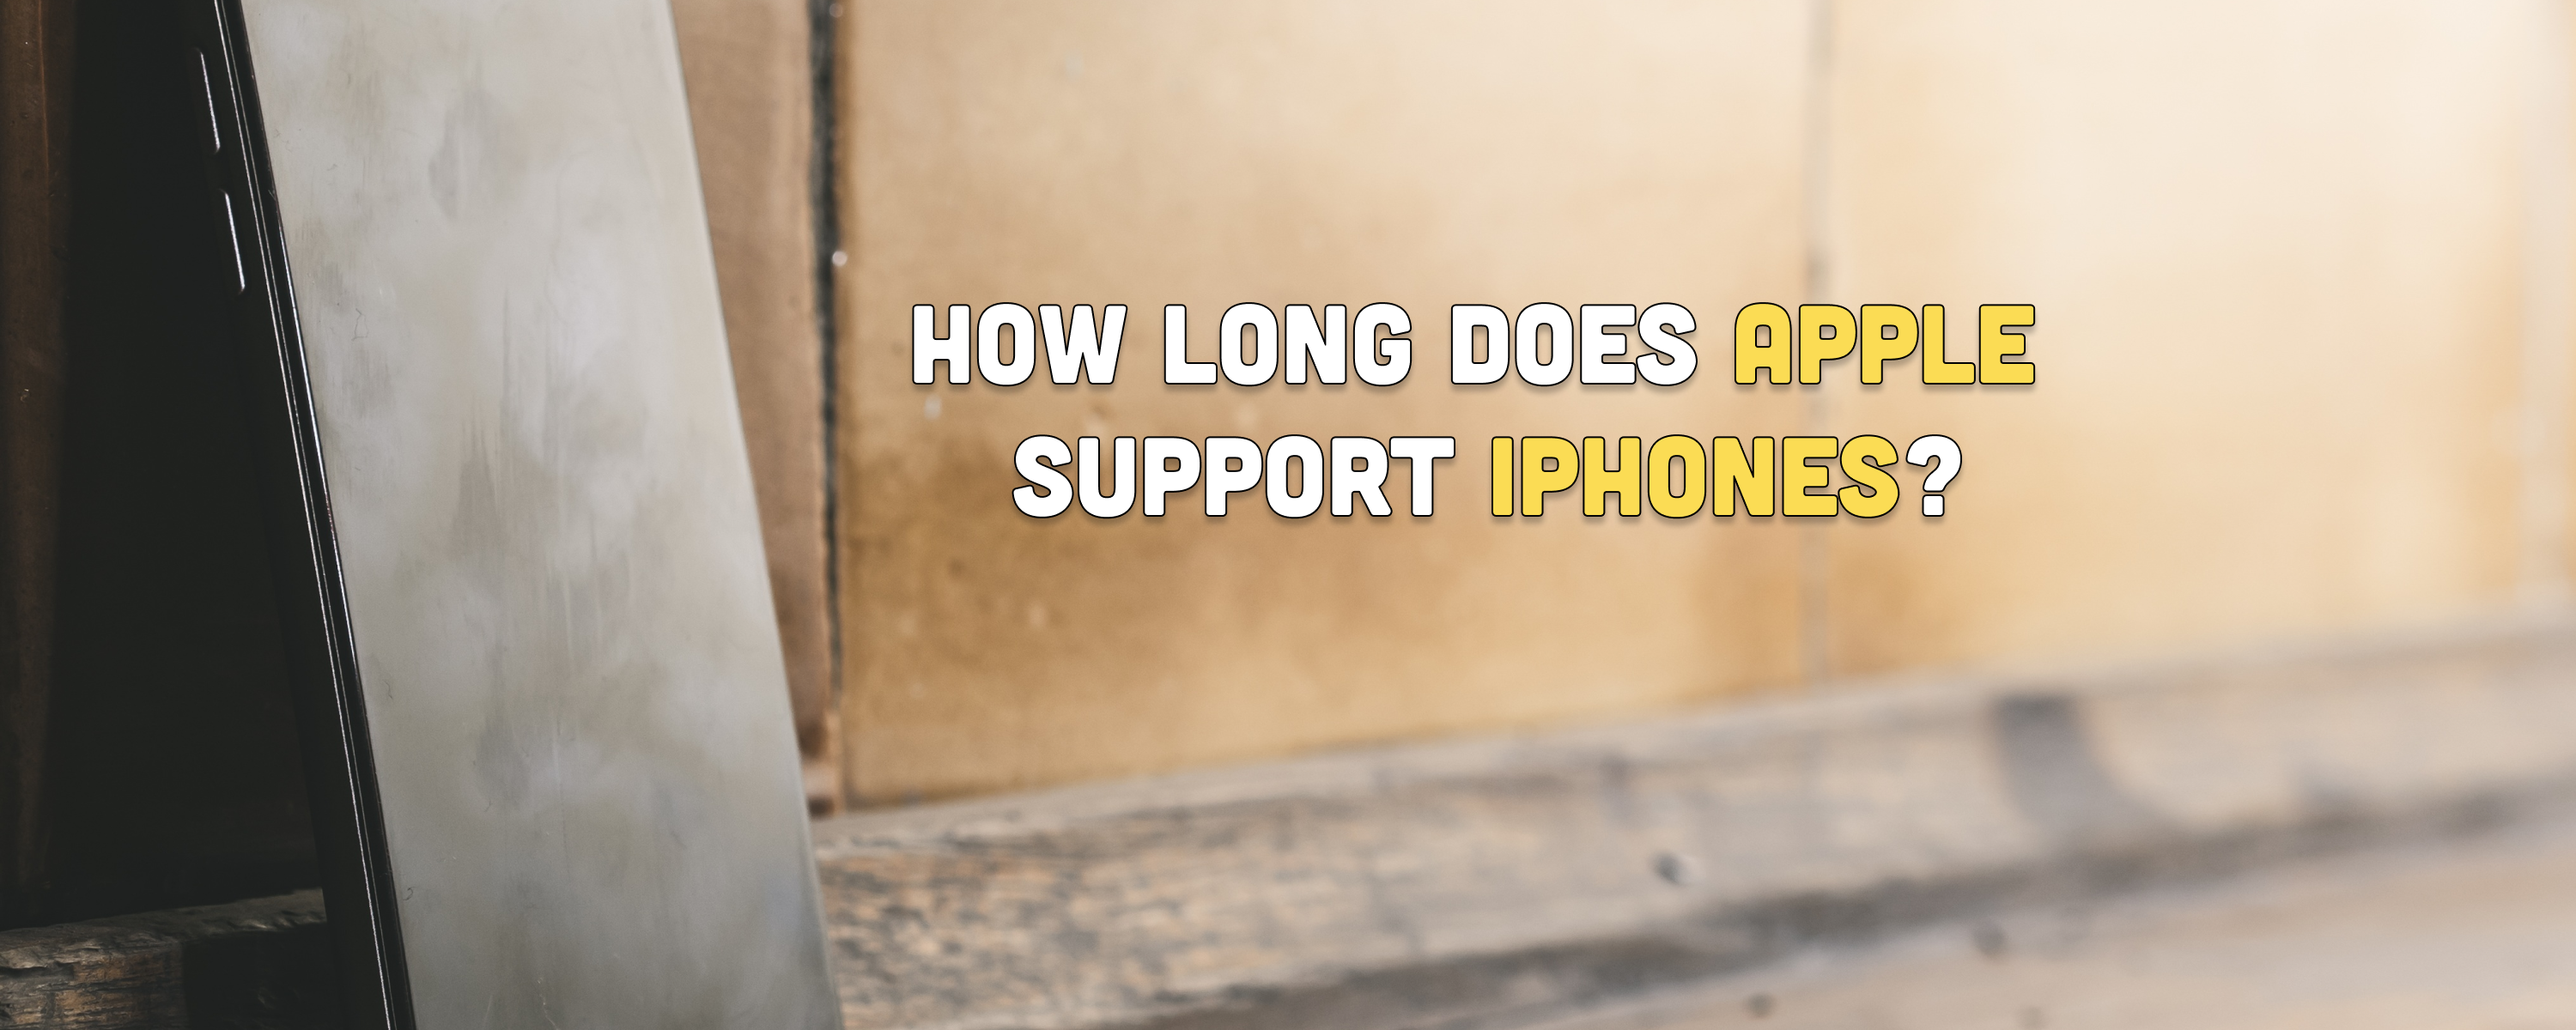 How Long Does Apple Support iPhones?